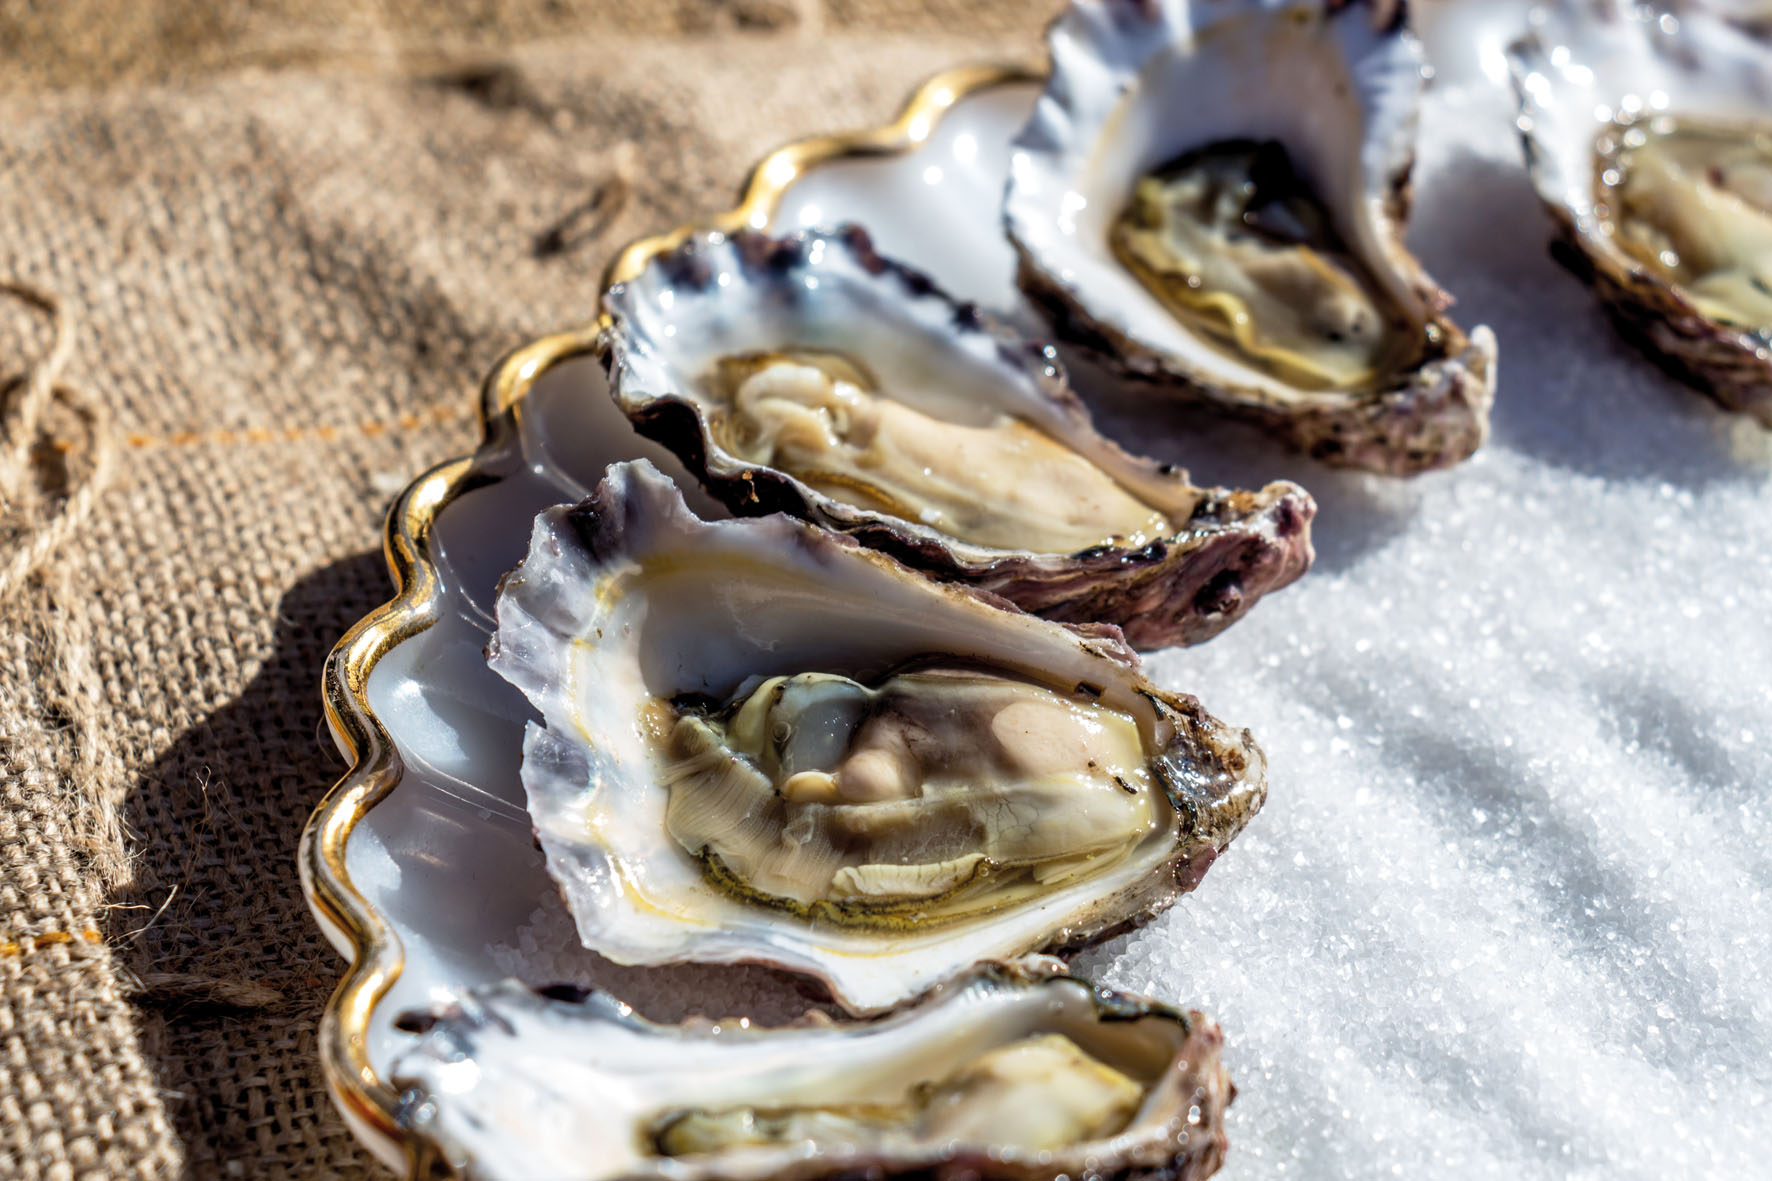 Embarking on an oyster trail in New South Wales